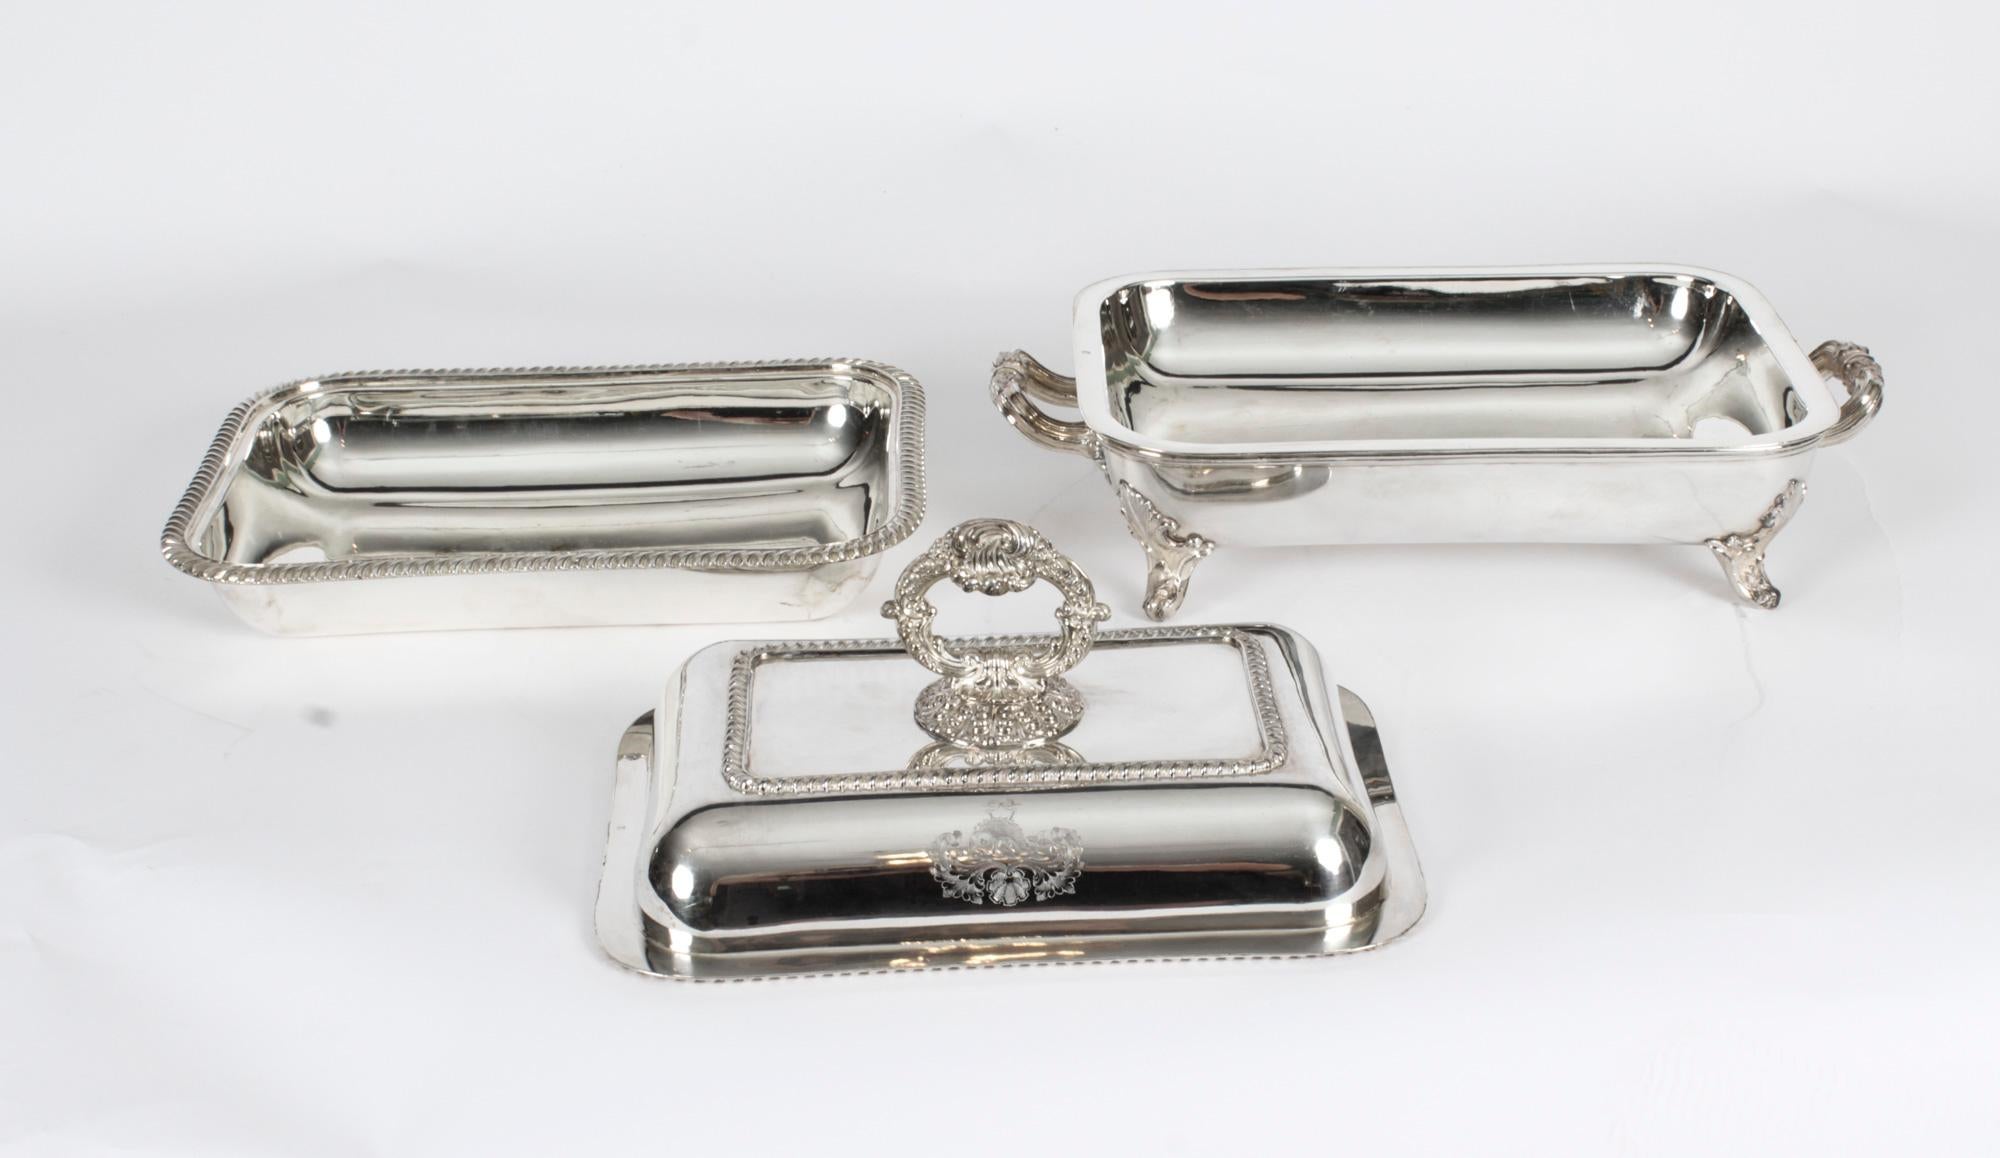 Antique Pair of English Silver Plated Entrée Dishes, Mid-19th Century 9